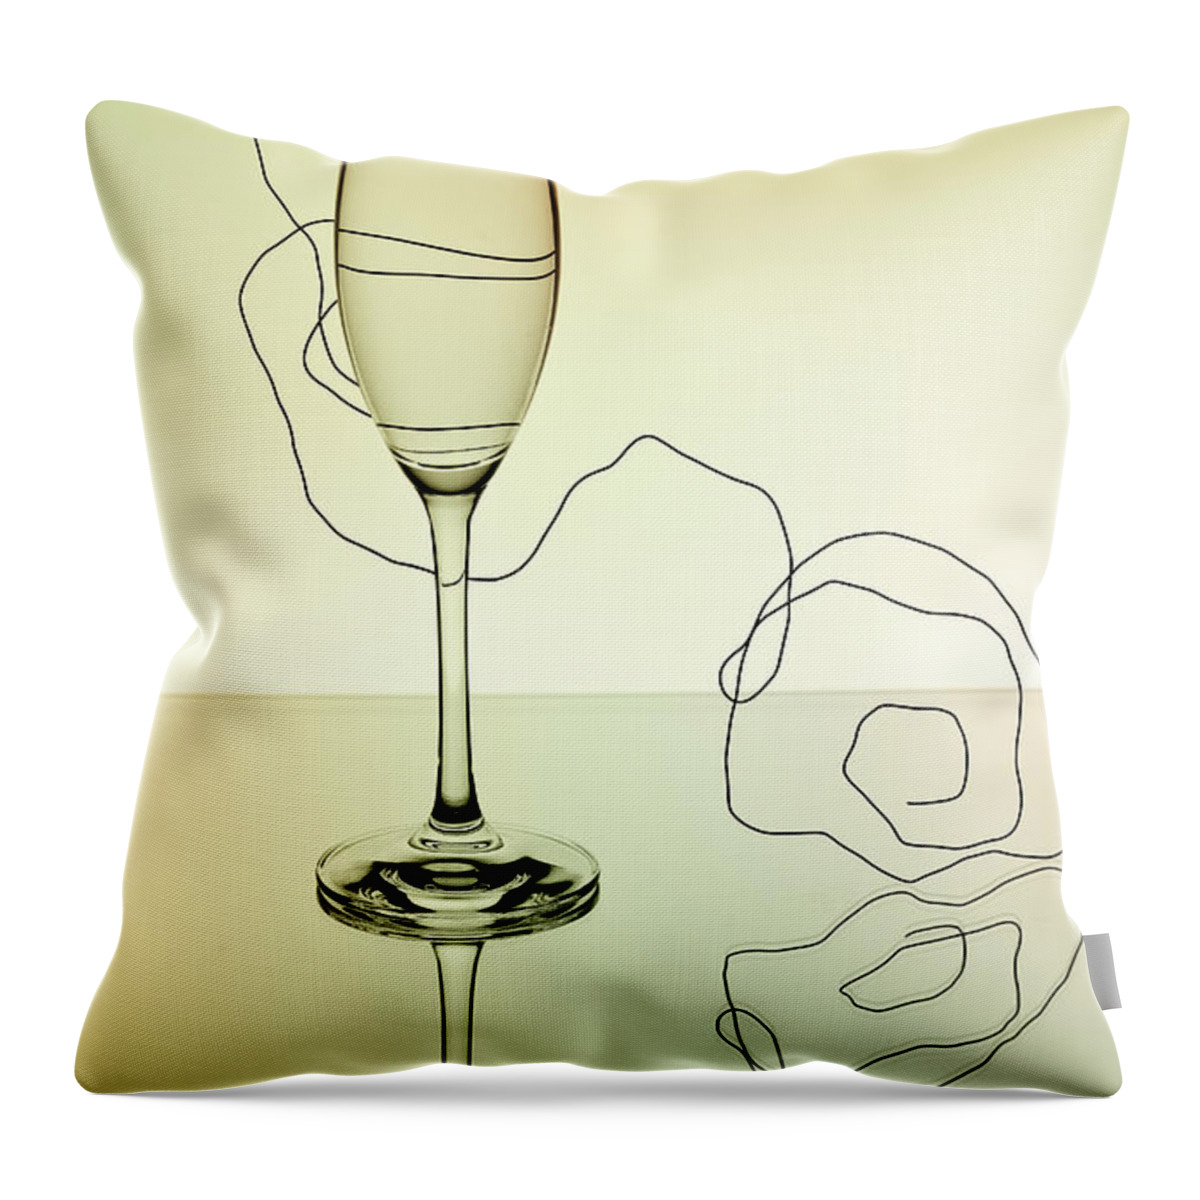 Glass Throw Pillow featuring the photograph Reflection 01 by Nailia Schwarz